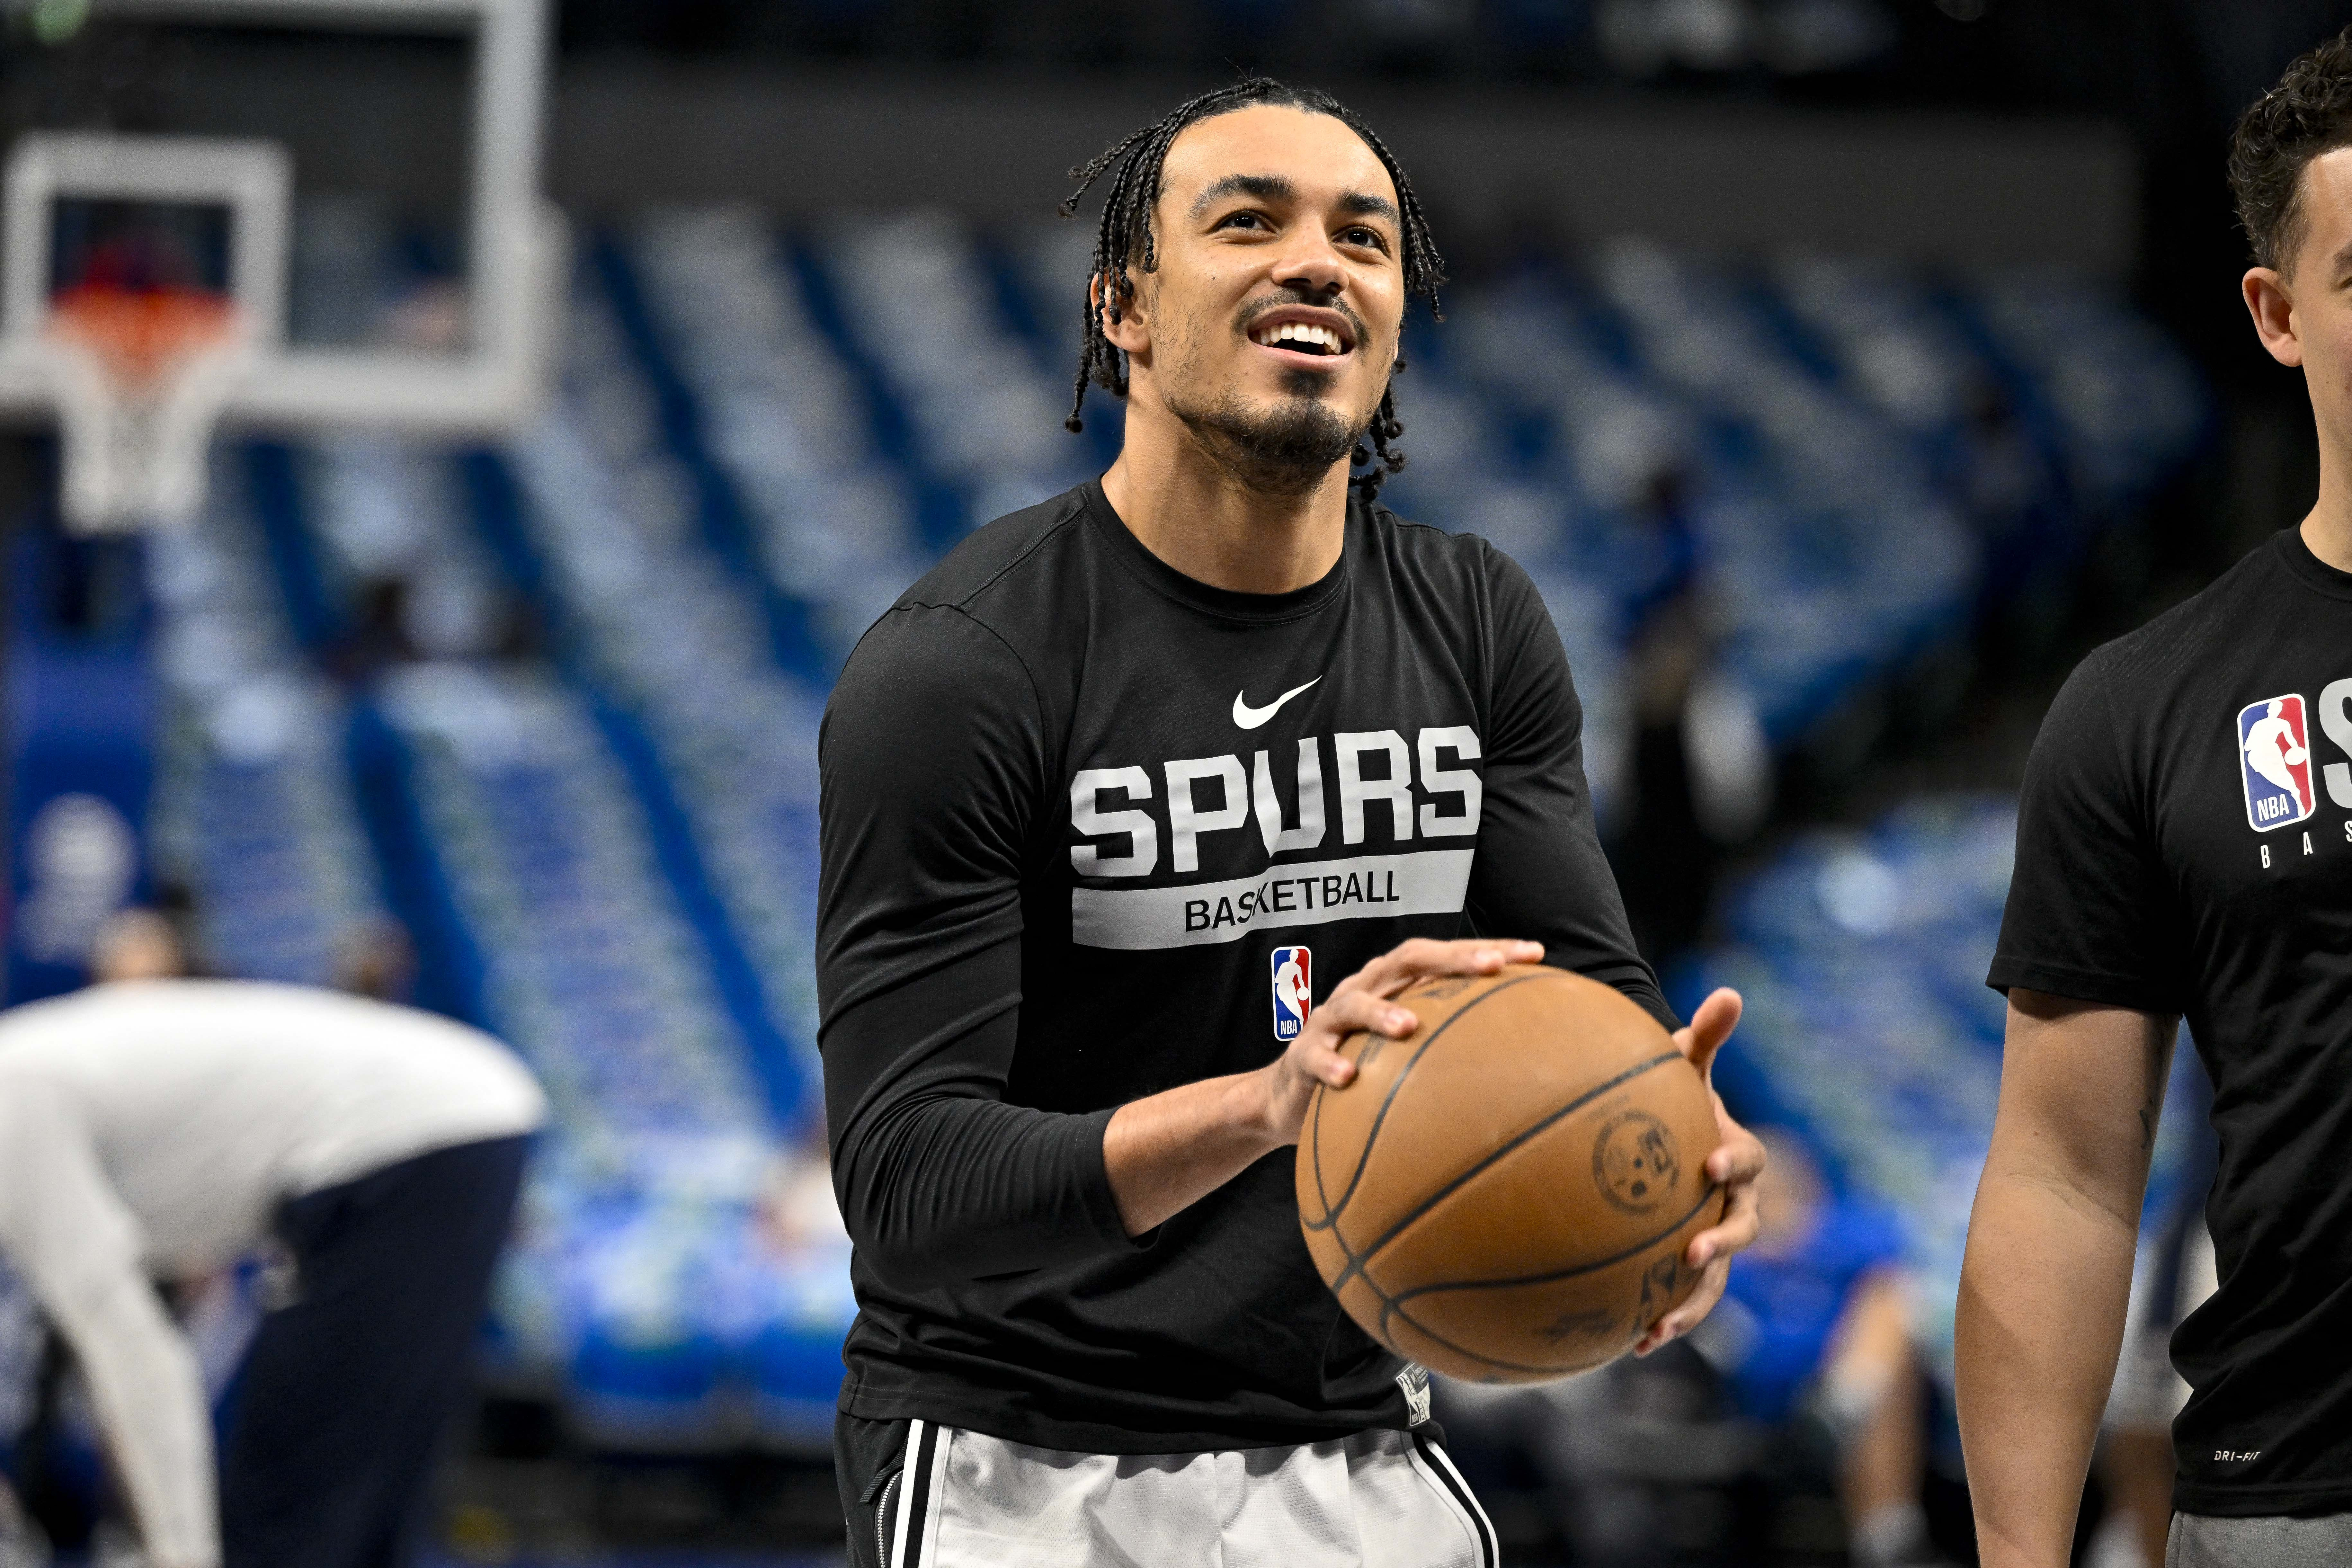 Dominick Barlow staying with the Spurs